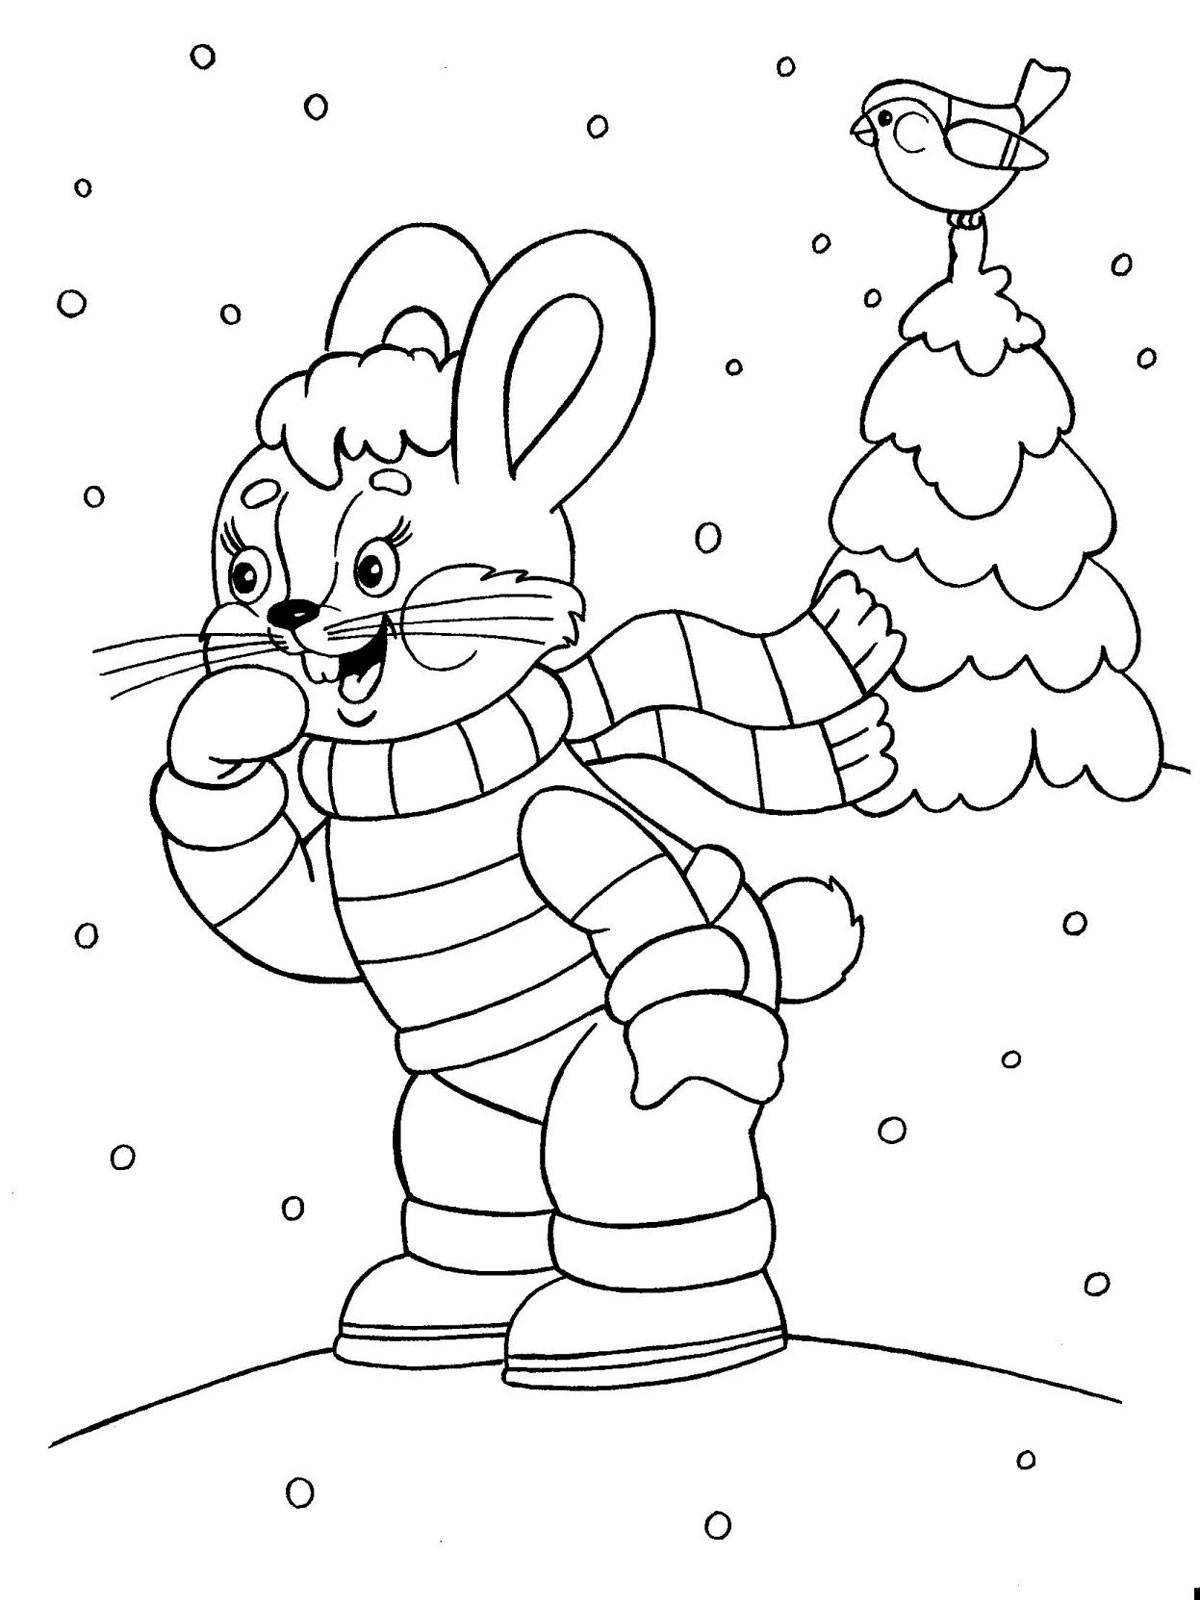 Colorful coloring rabbit in winter